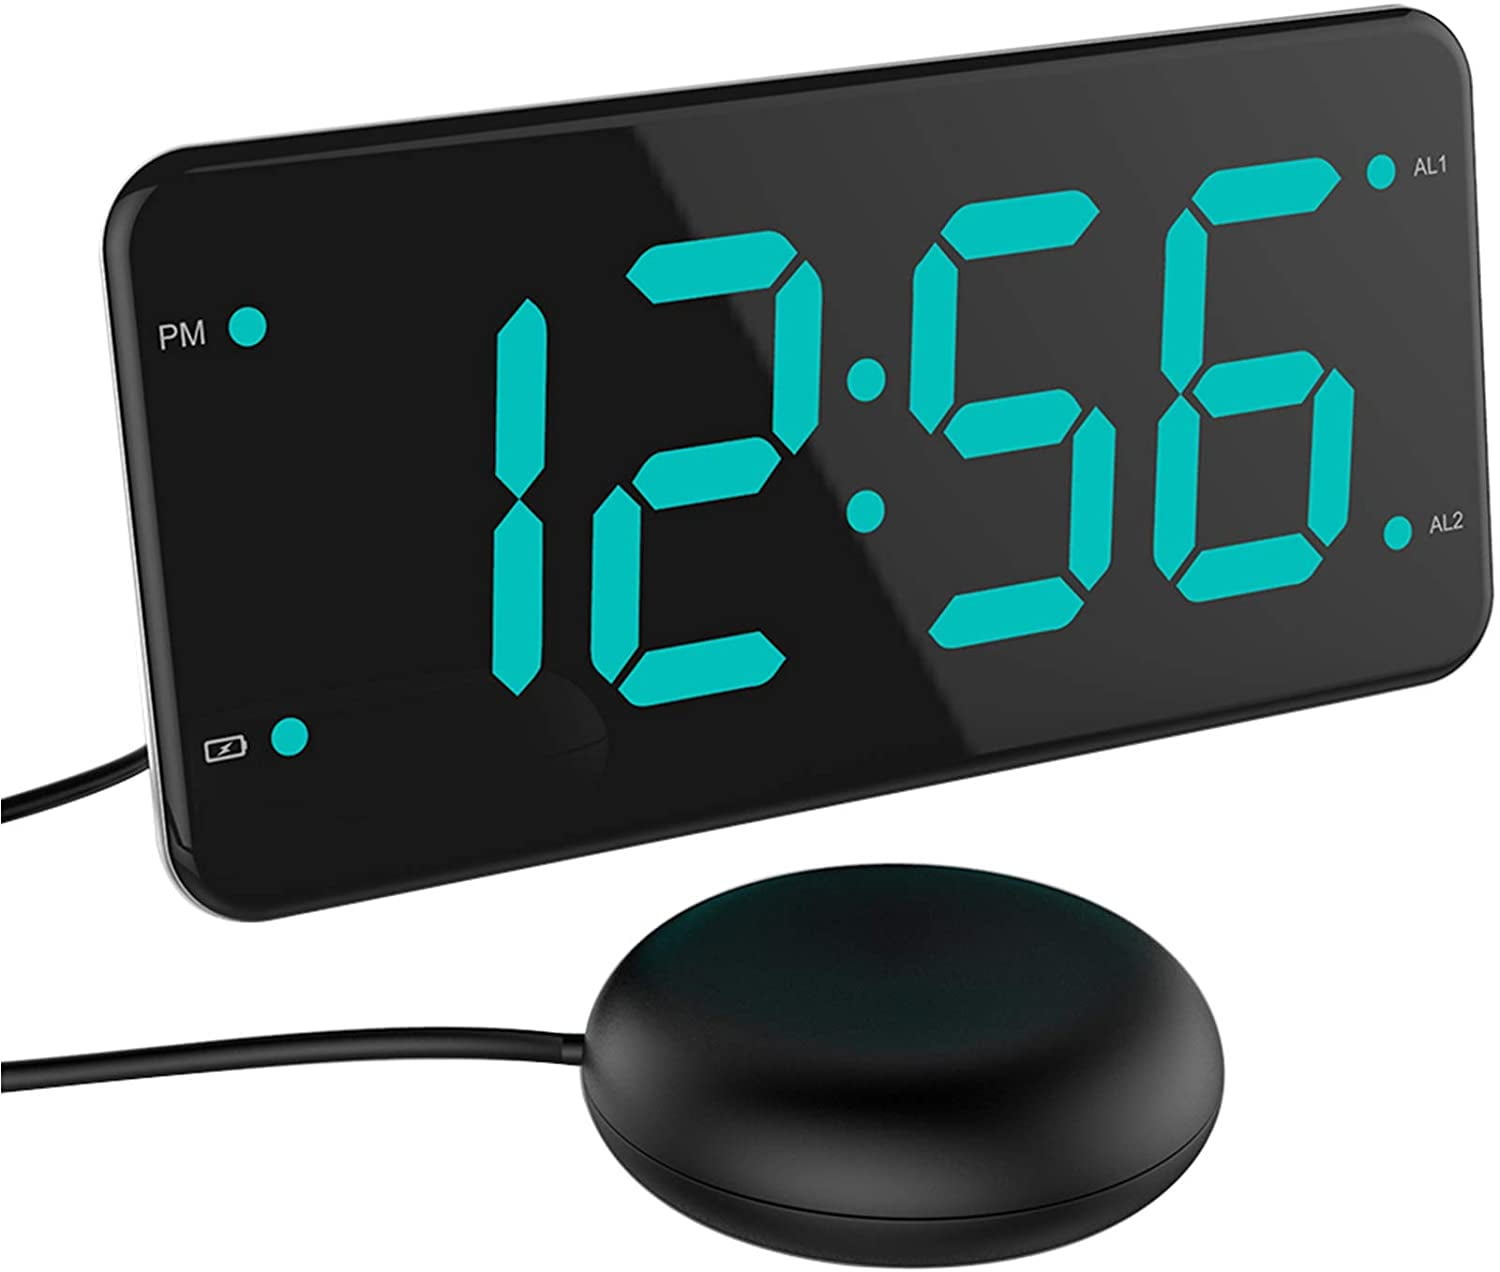 LED/Vibrating Alarm Clock w/Wired Bed Shaker Ideal for Deaf/Hearing Impaired 